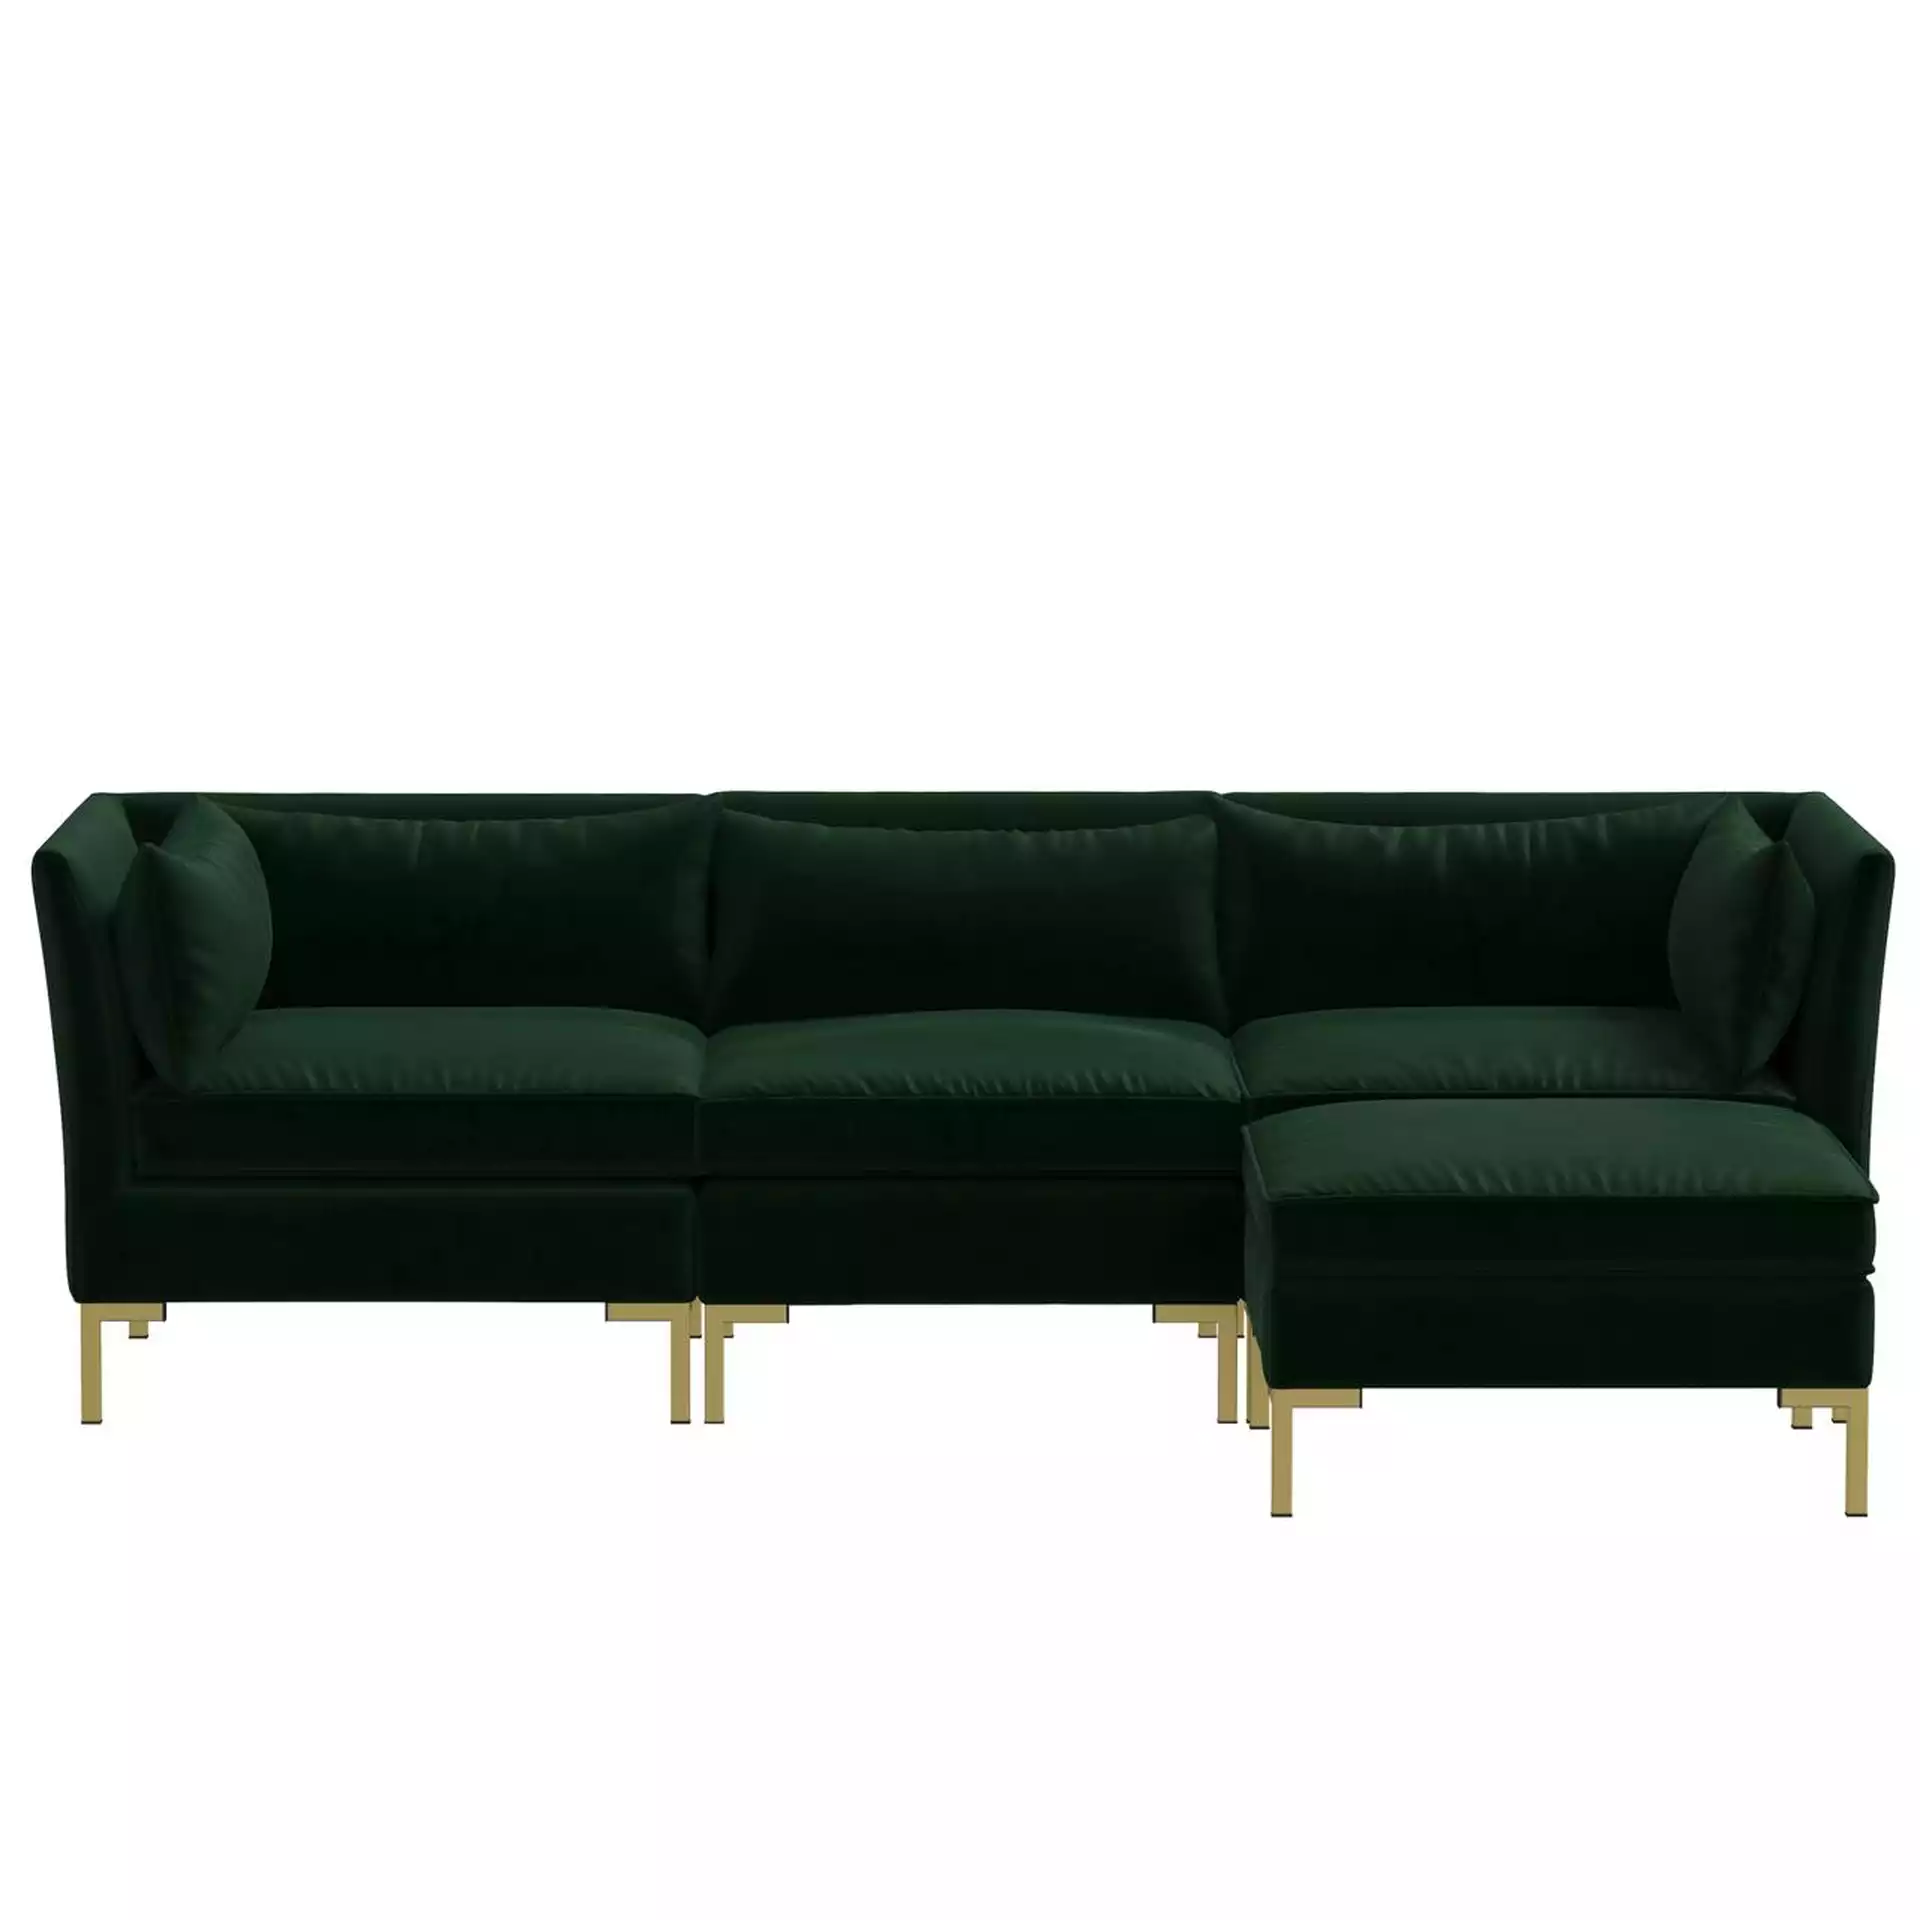 Vandalia 4 piece Sectional in Fauxmo Emerald